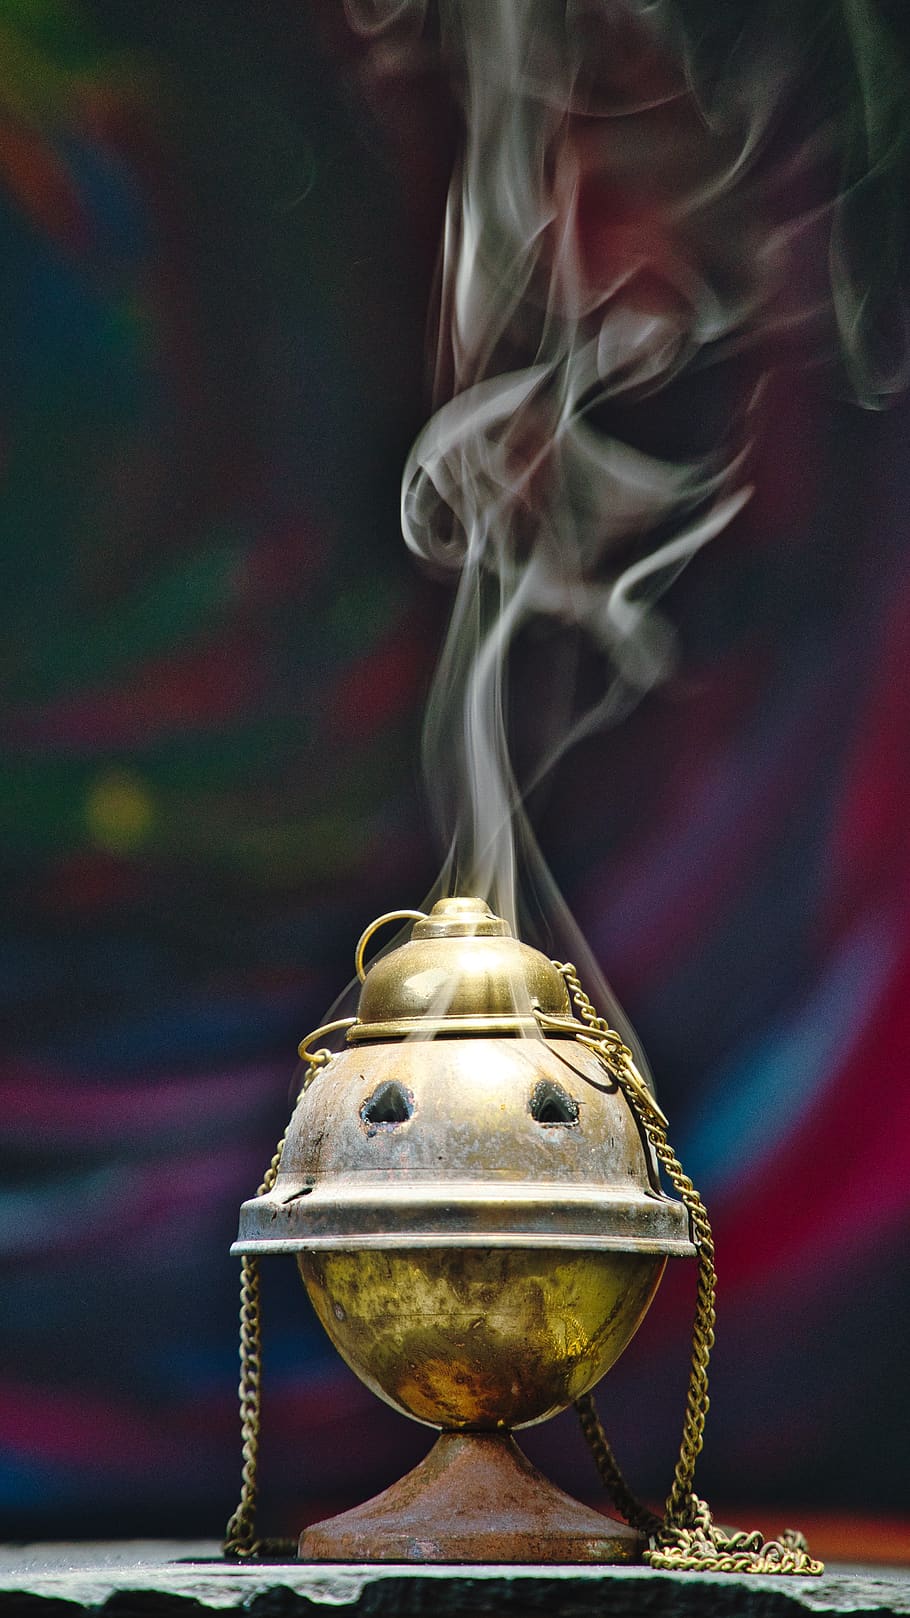 incense, avengers, censer,, smoke, prayer, smoke - physical structure, burning, focus on foreground, close-up, heat - temperature